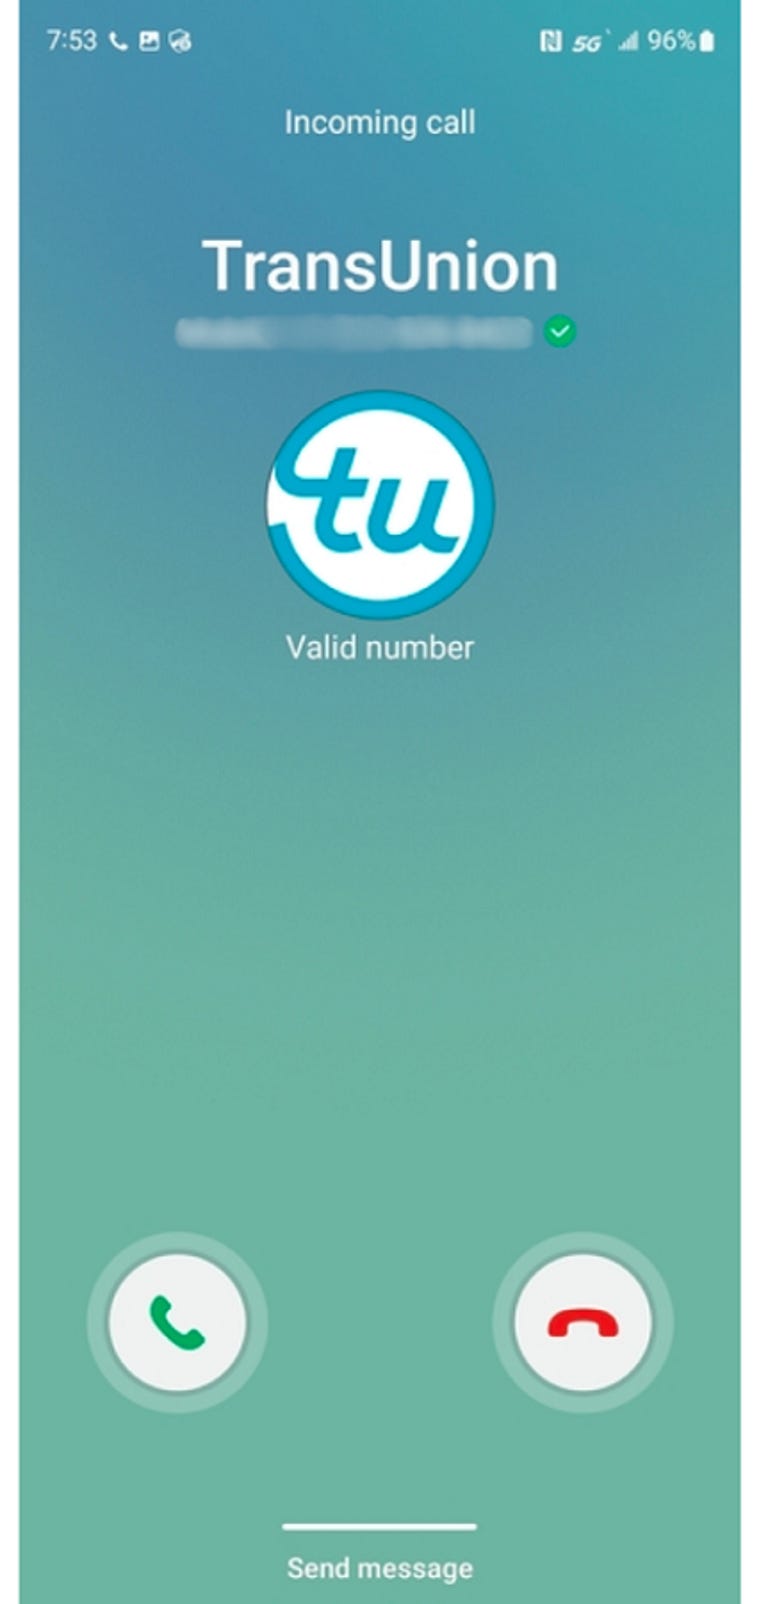 A smartphone screen with a logo for a company appearing on a call screen -- in this case, TransUnion's circular white logo with the letters 'tu' in blue.